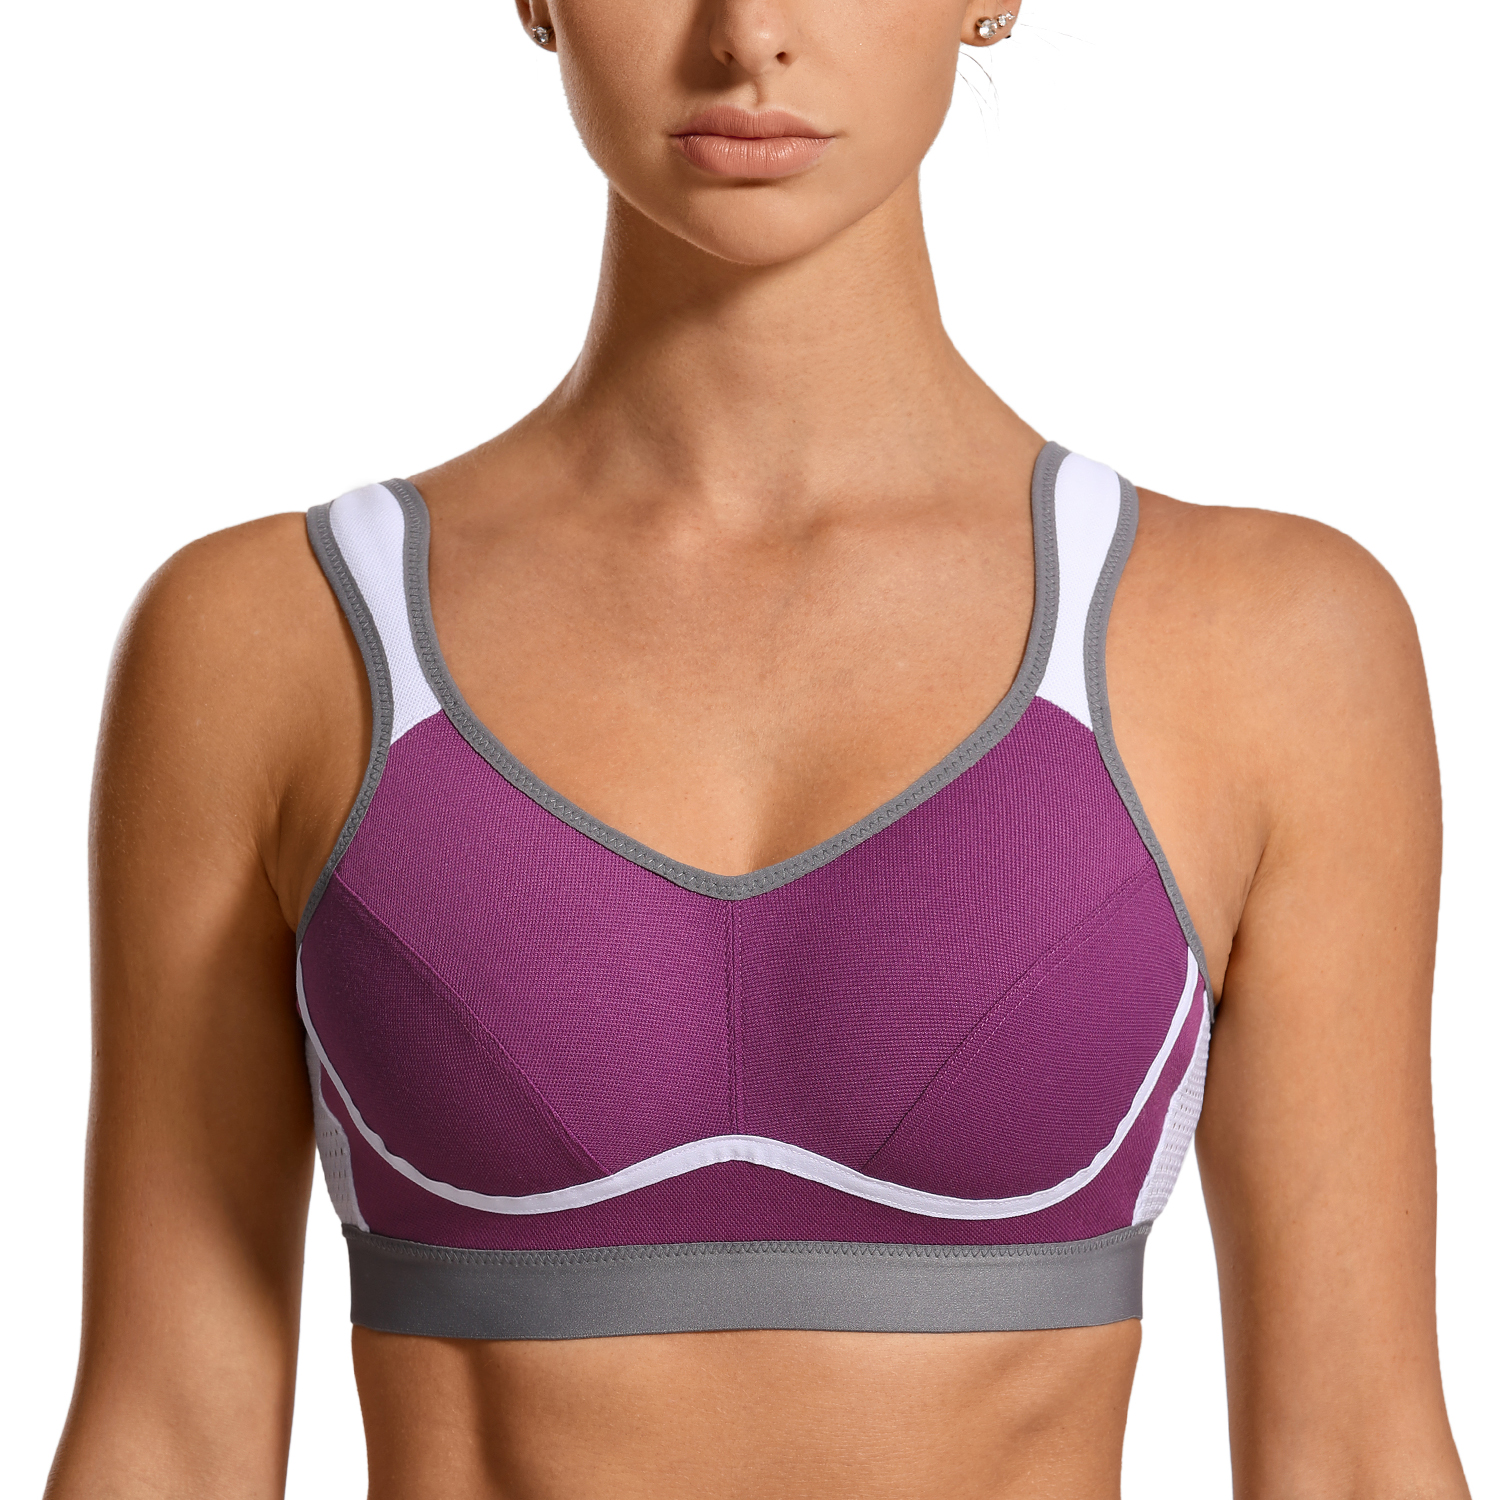 SYROKAN Sports Bra Women Max Control Solid High Support Plus Size